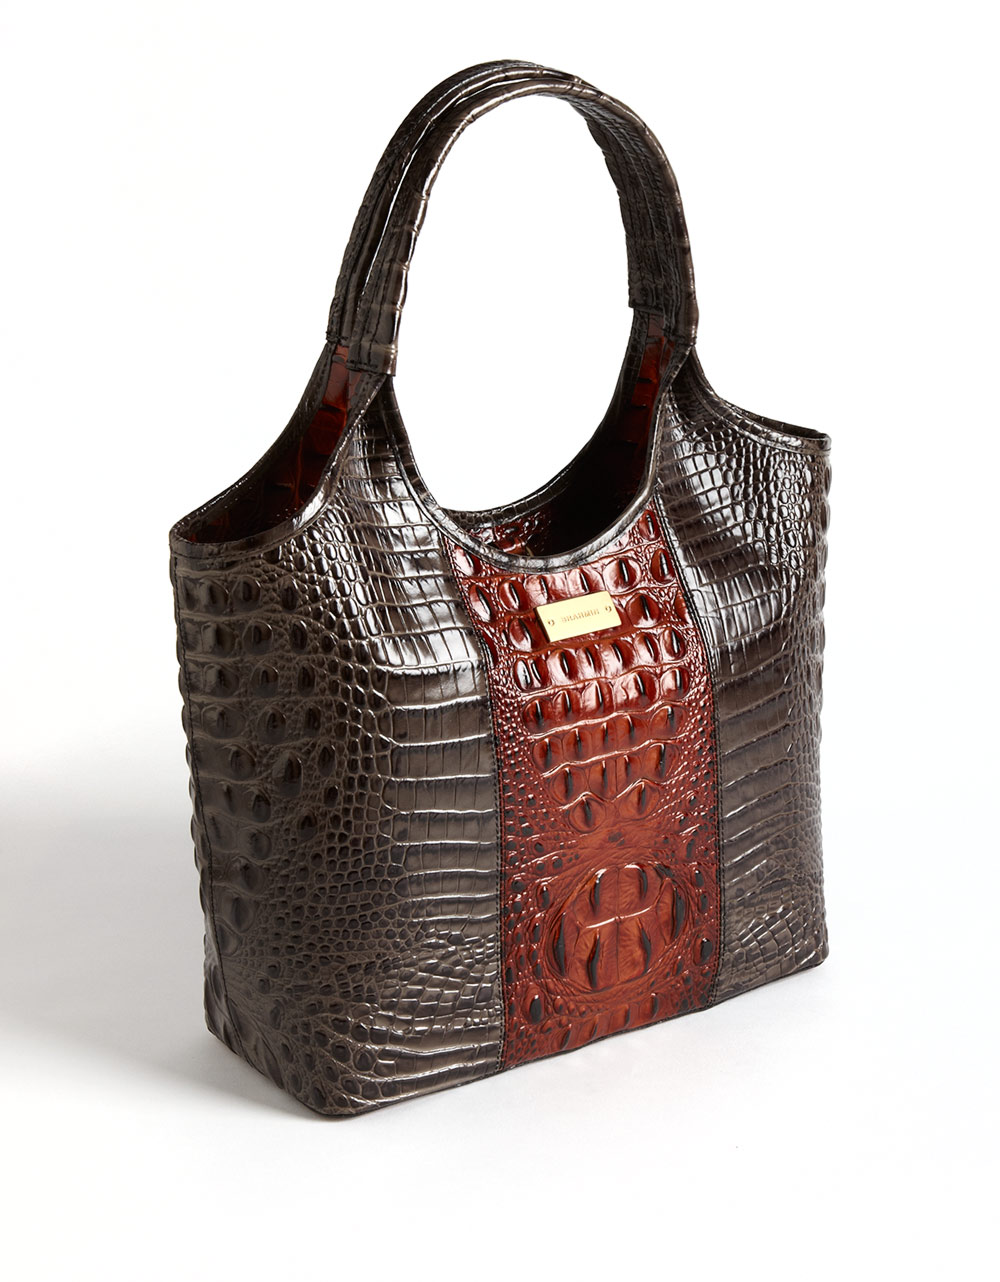 Brahmin Small Shopper Leather Tote Bag | Lyst